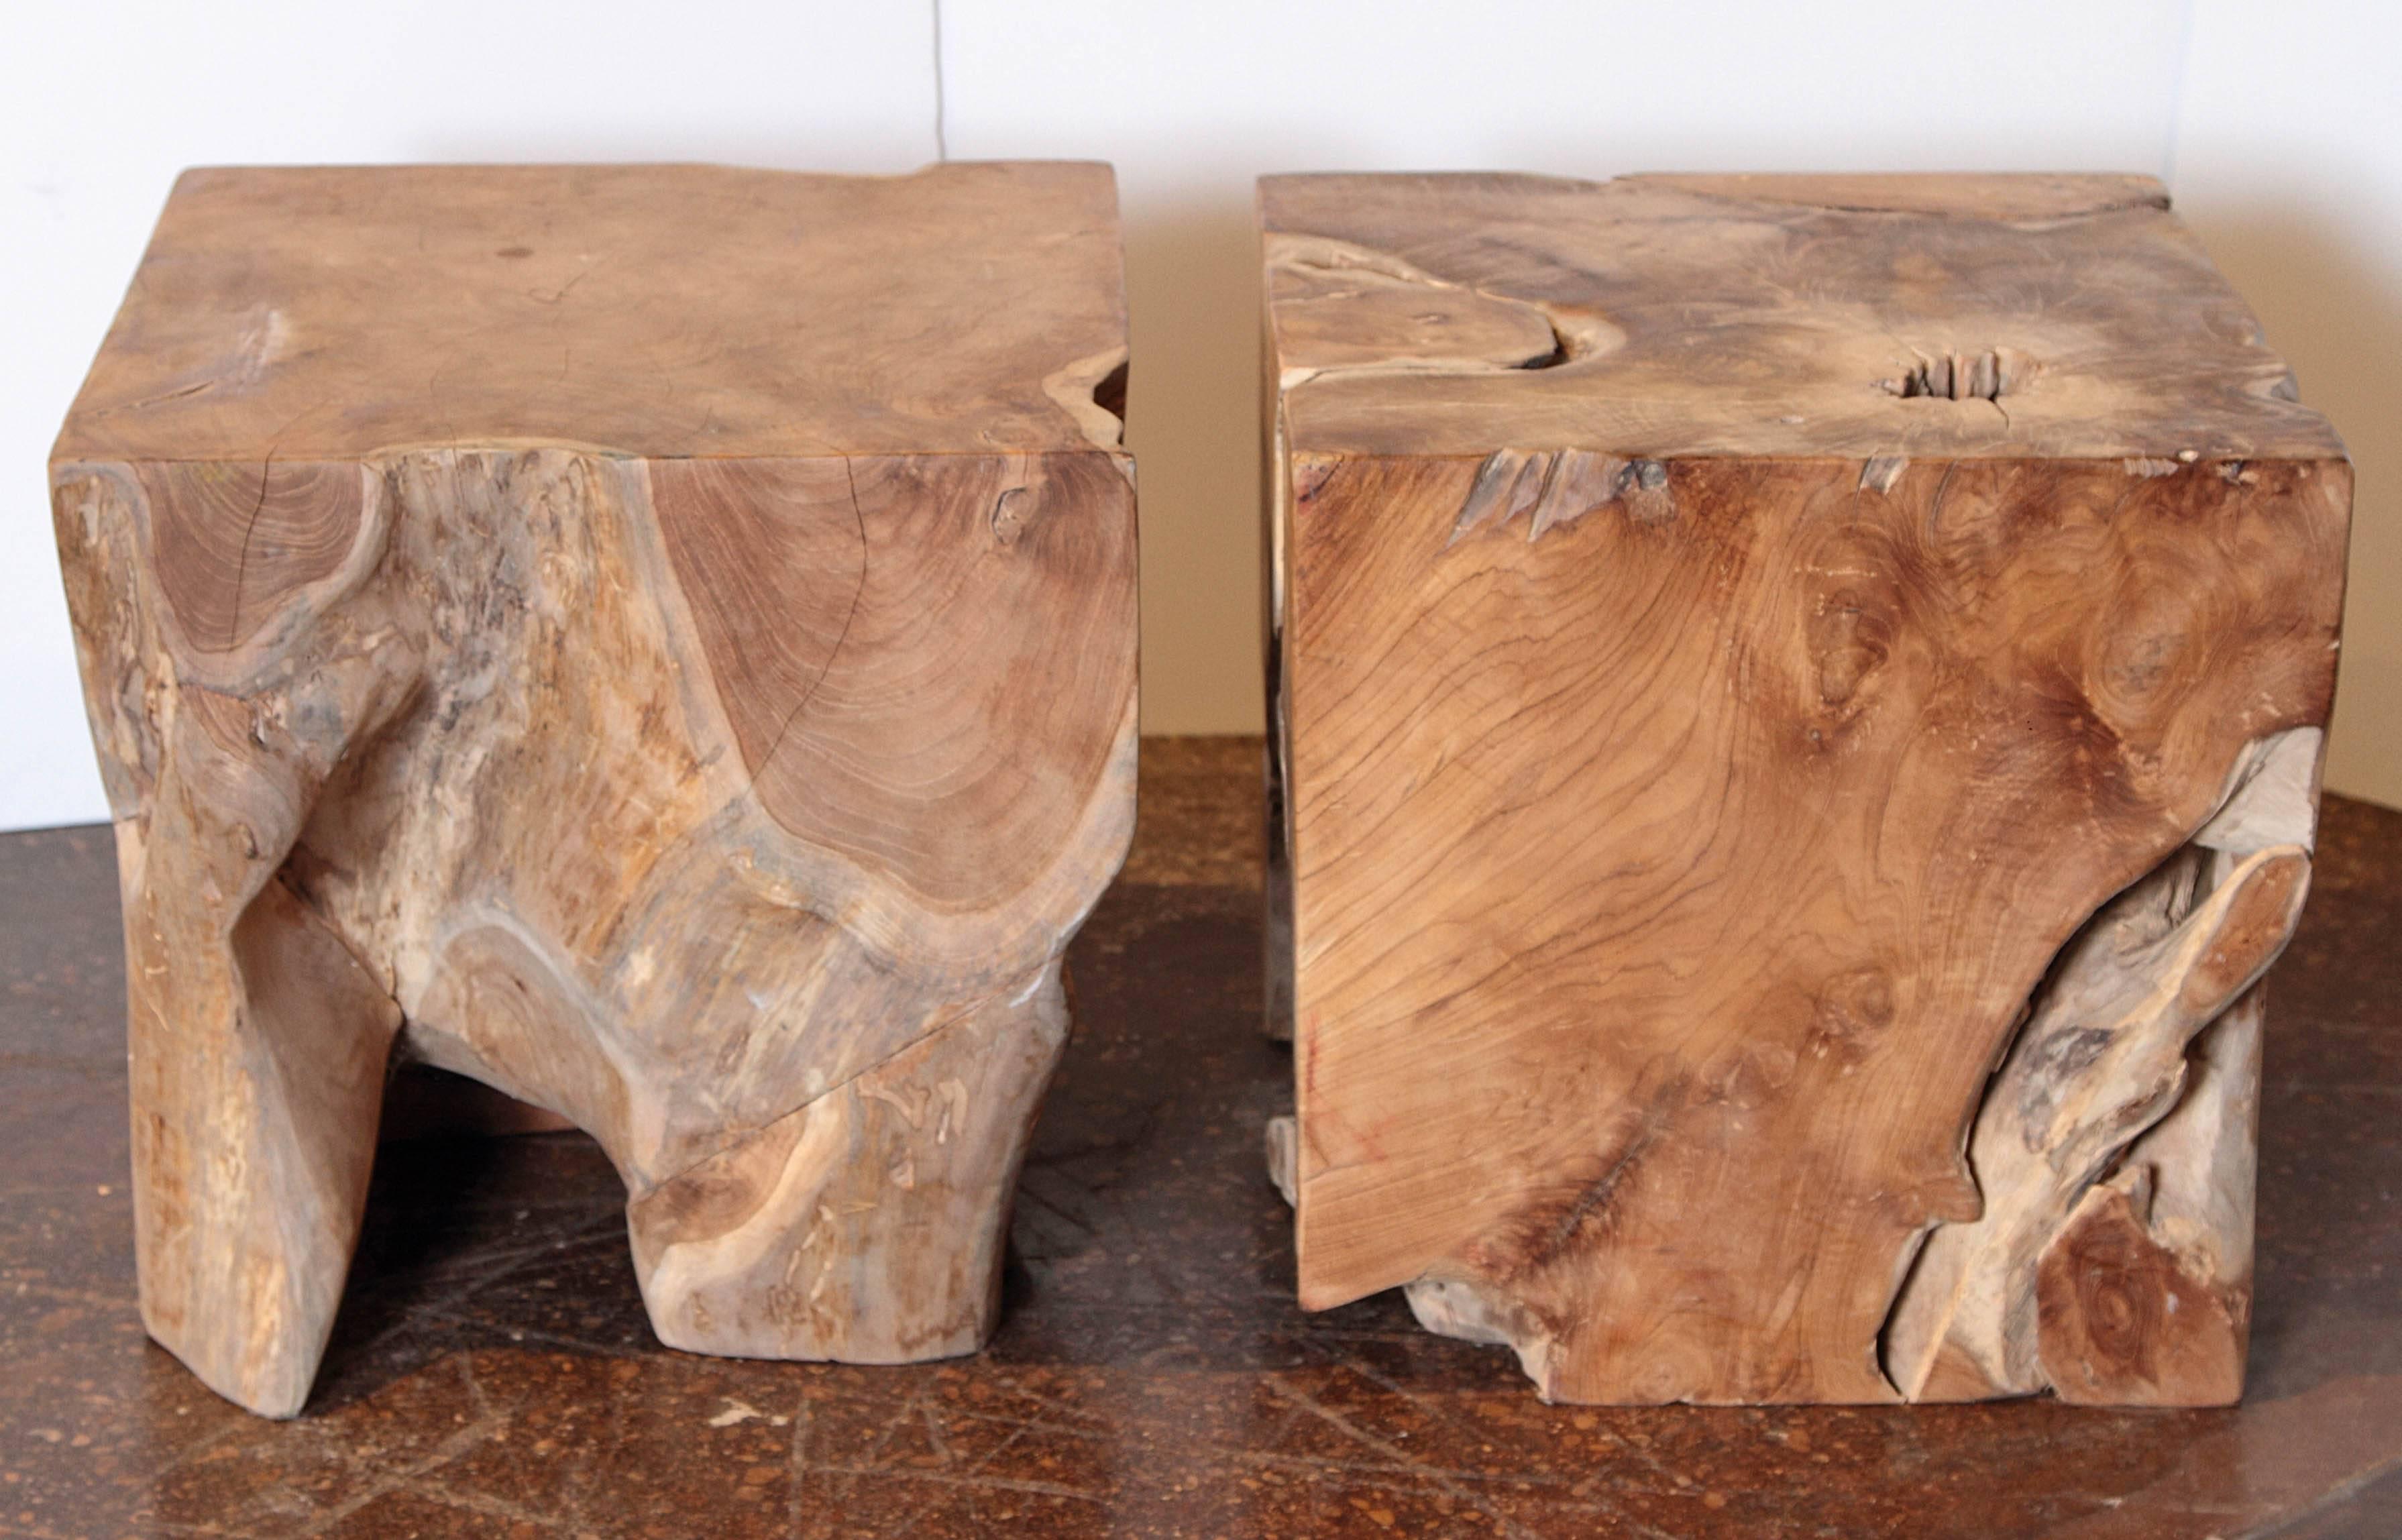 Modern organic teak end tables.
Pair of natural teak square shape end tables. 
Can be used indoor or outdoor. 

If outdoor, exposed to the sun, it will change coloration to naturally bleached wood. Teakwood extremely weather resistant, bug